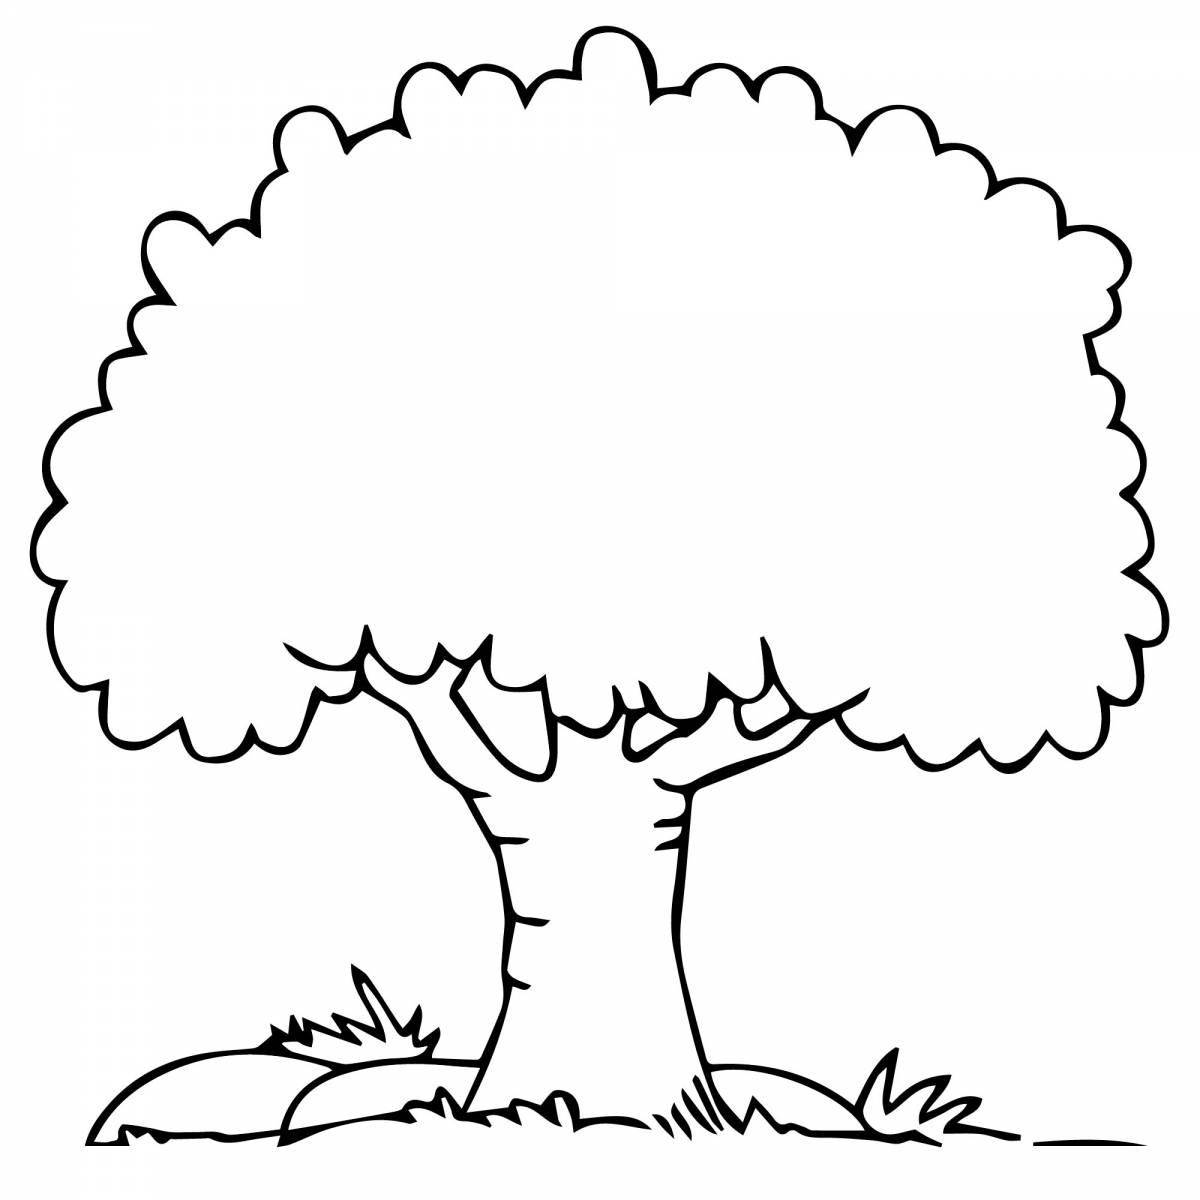 Colorful magic tree coloring pages for kids